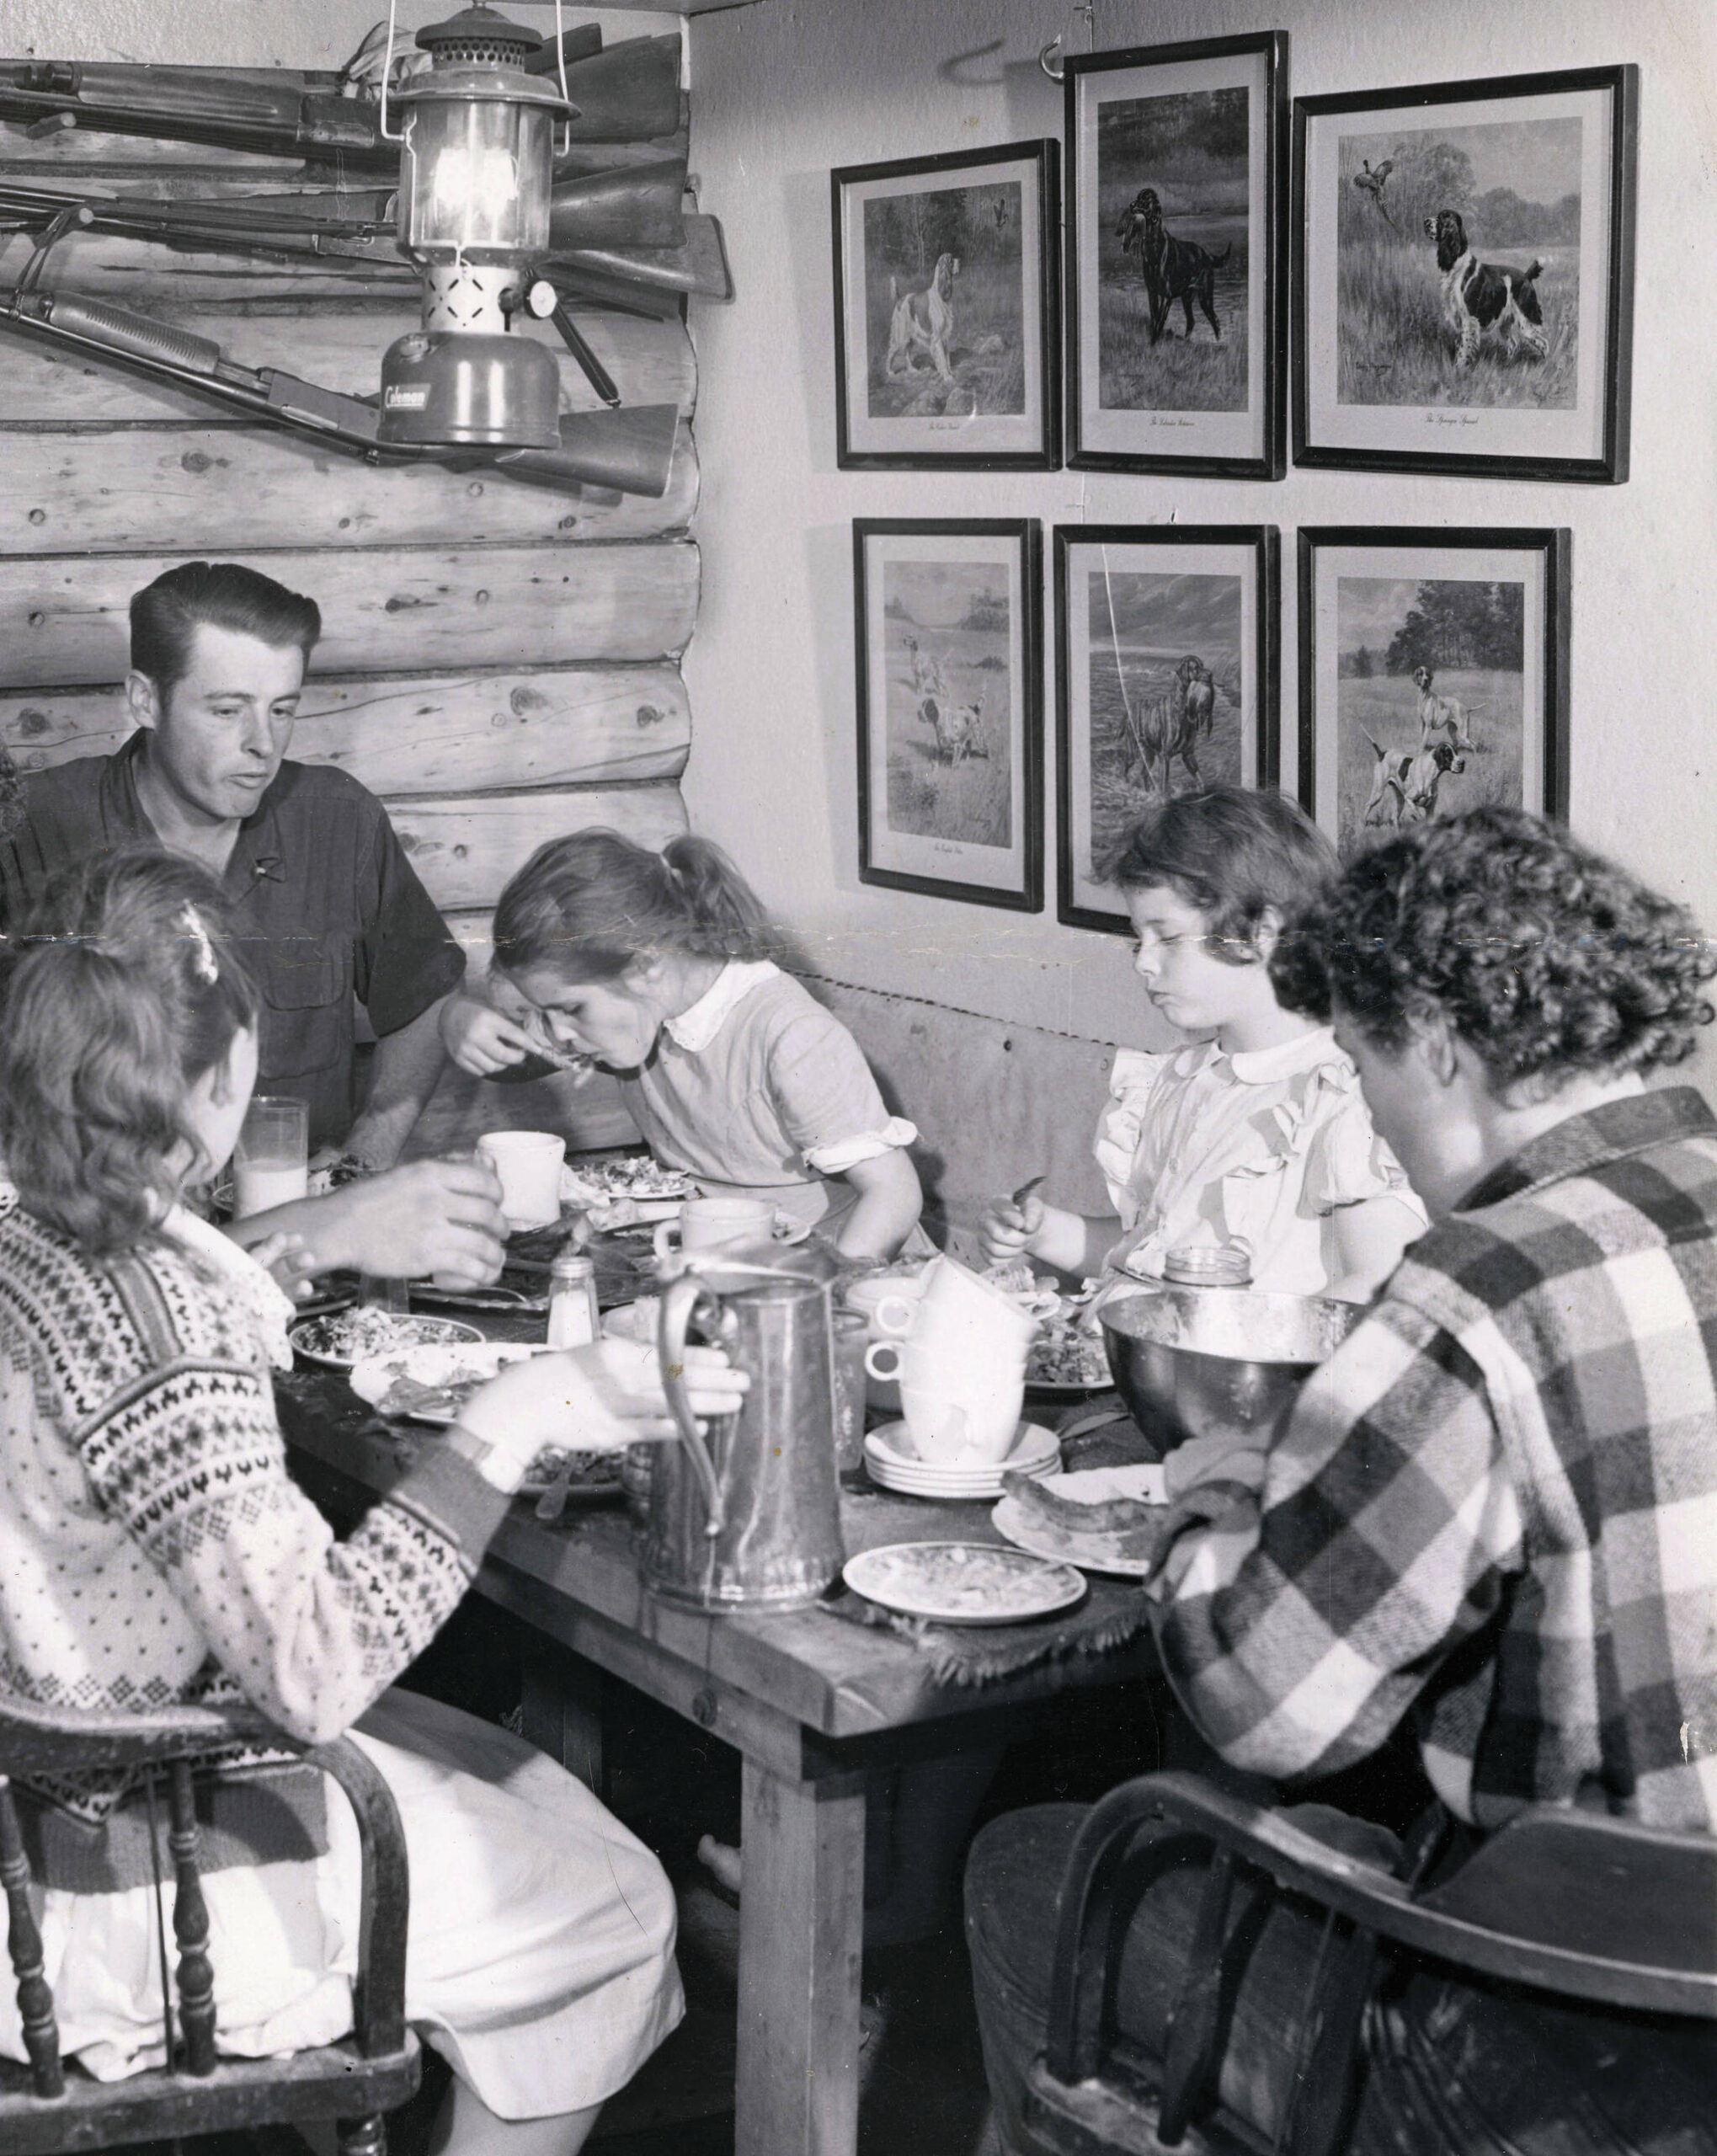 The Lancashire family shares a meal in their original homestead cabin. (1954 photo by Bob and Ira Spring for Better Homes & Garden magazine)